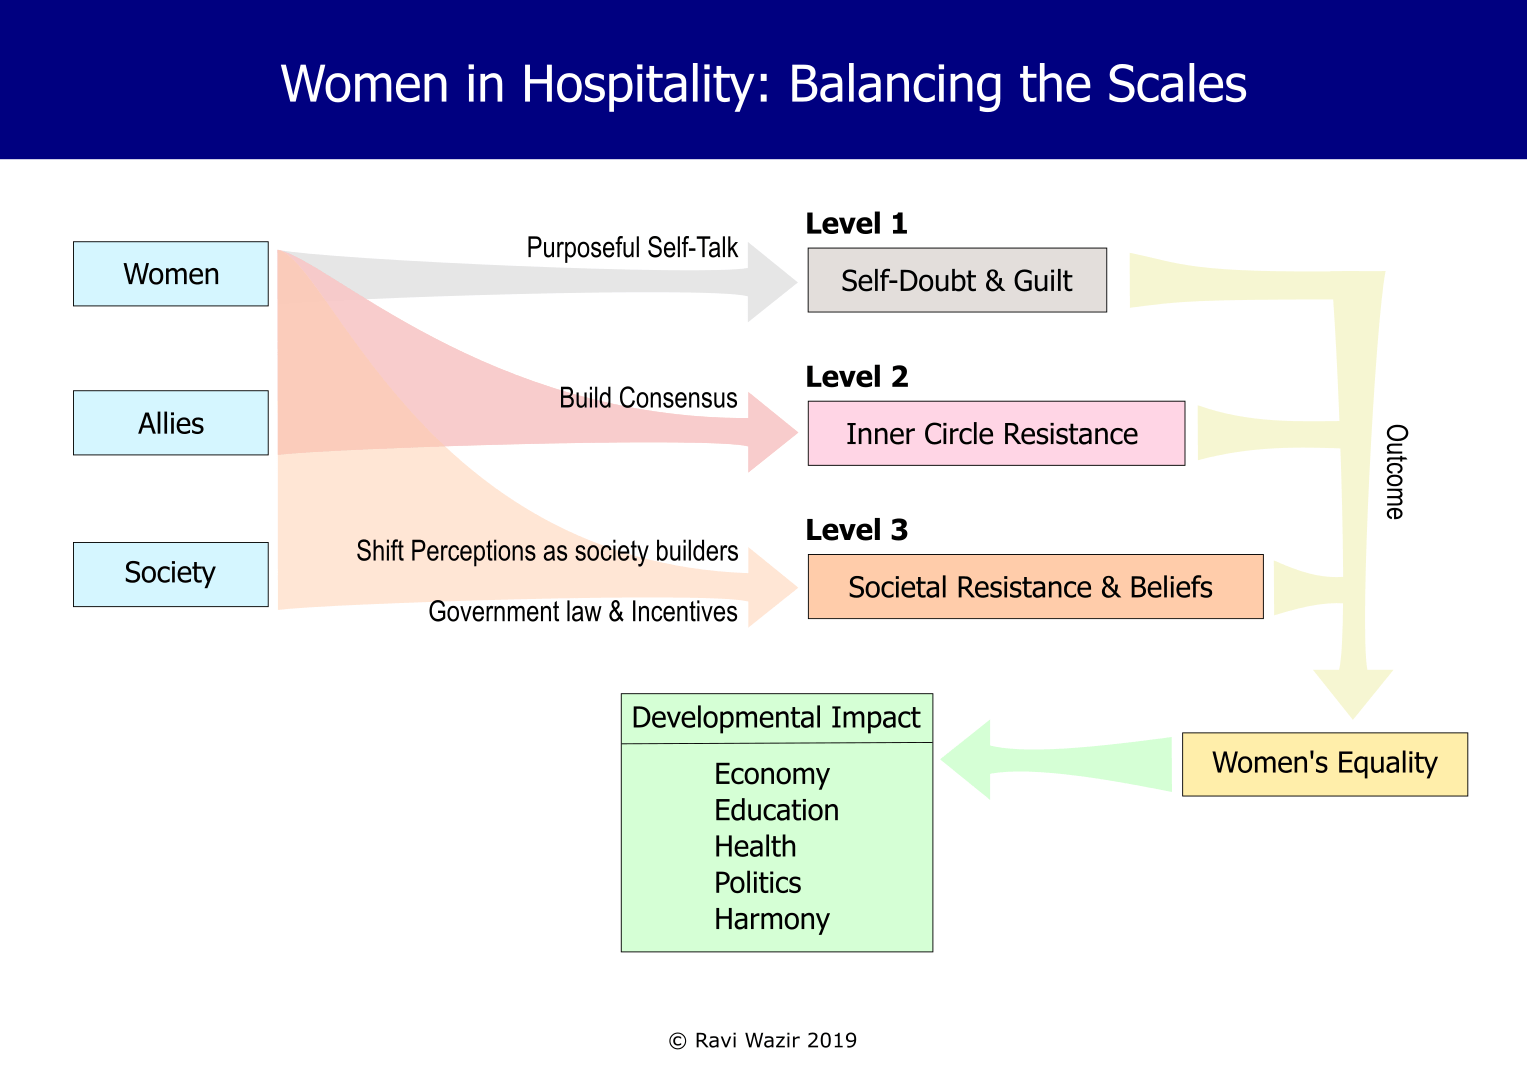 Women in Hospitality: Balancing the Scales